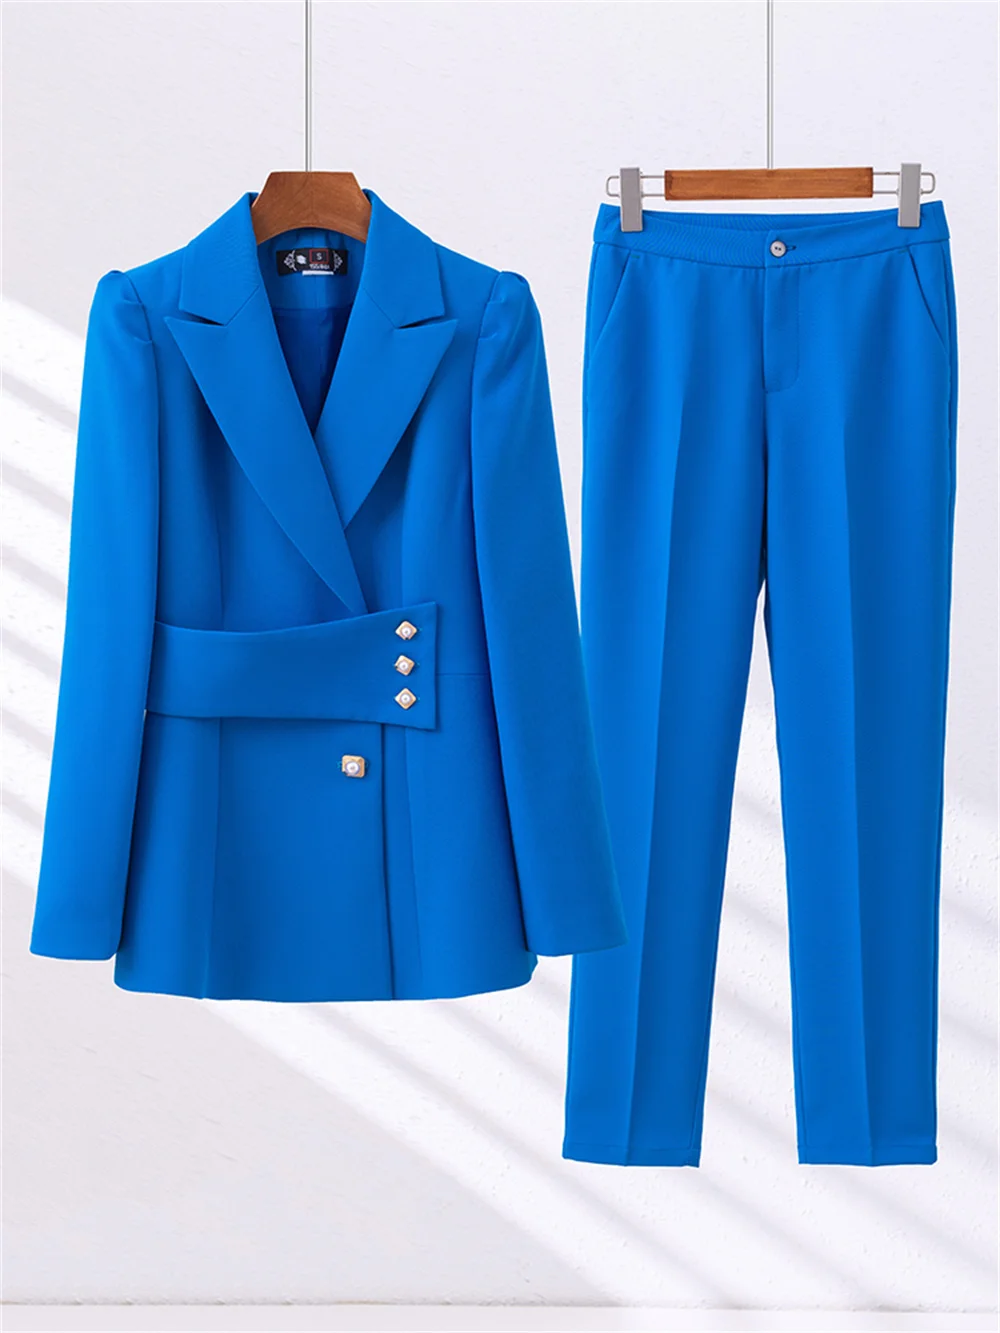 Blue Women's Pant Sets 2023 New in High Quality Casual Business Blazer Suits Elegant Ladies Formal Jacket + Trouser 2 Piece Set